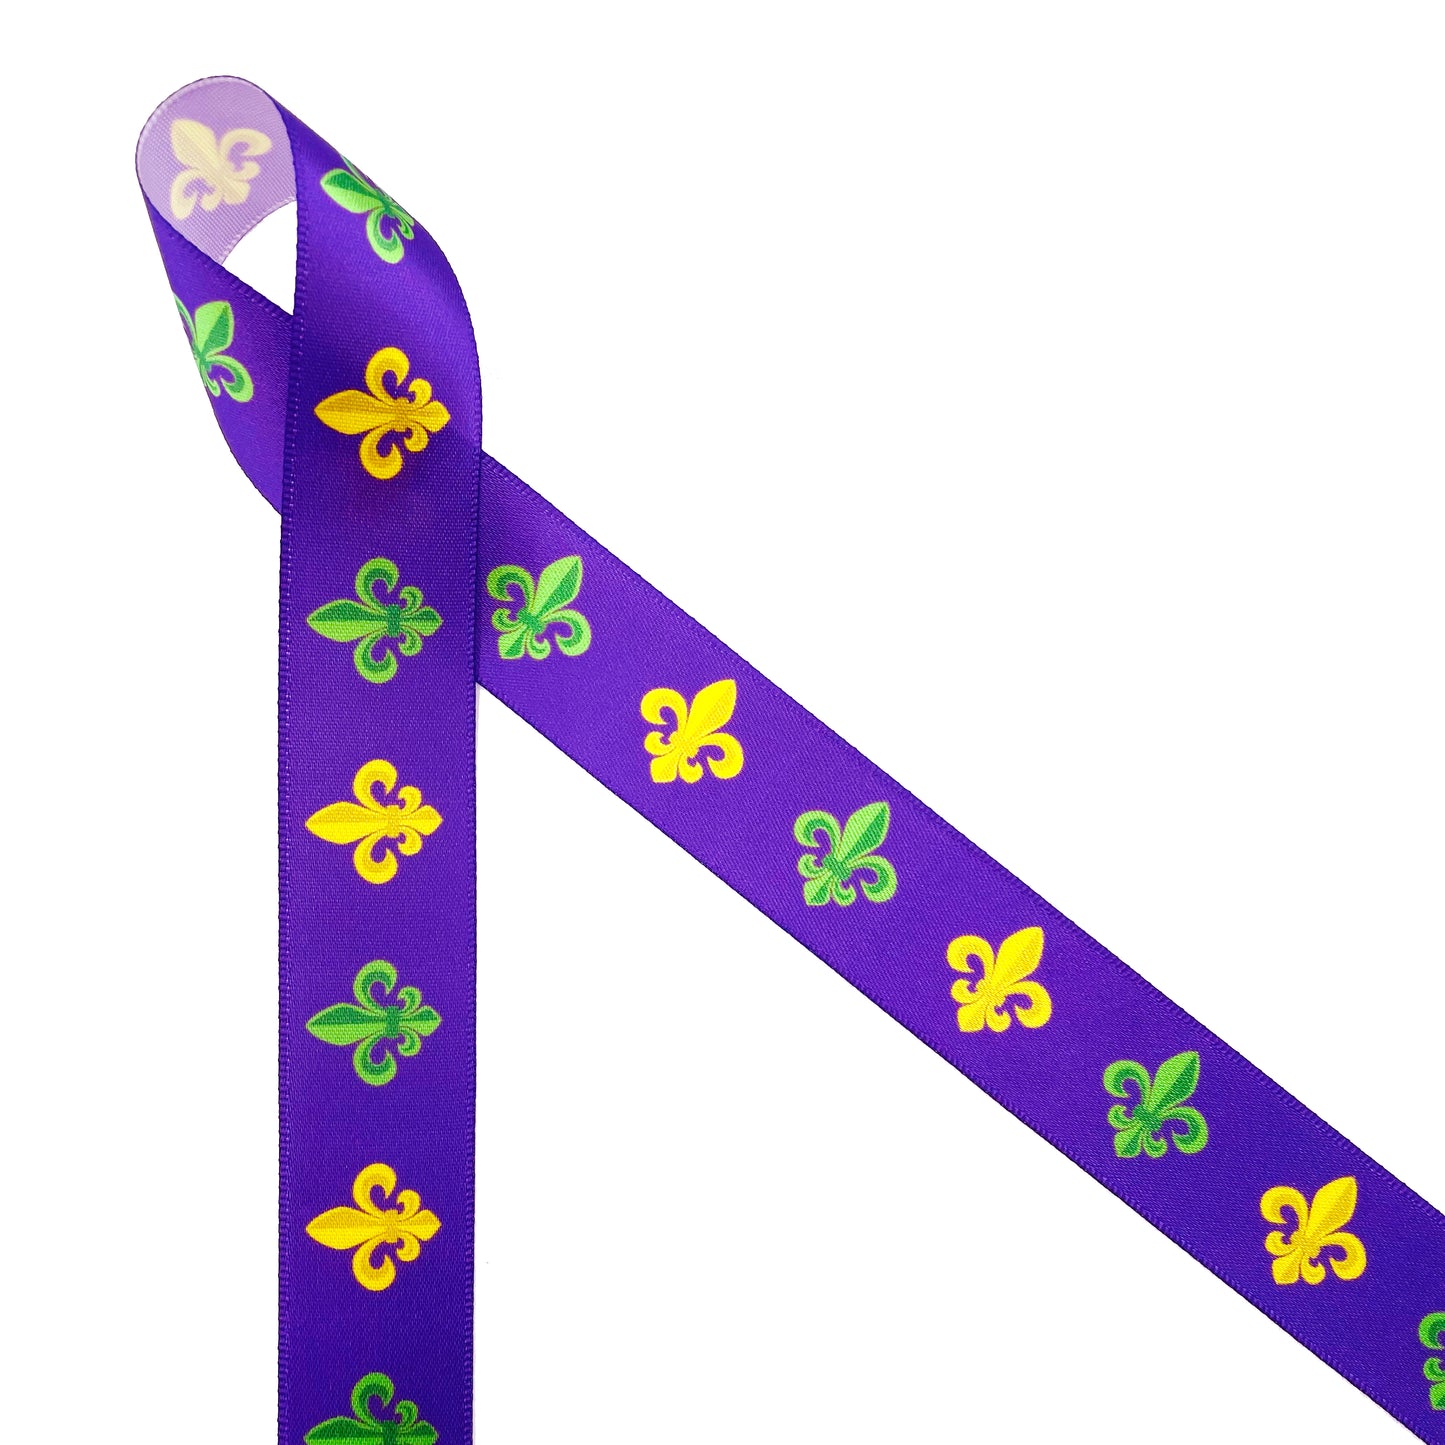 Mardi Gras ribbon with French fleur de lIs in green and yellow on a purple background printed on 7/8" white grosgrain and satin